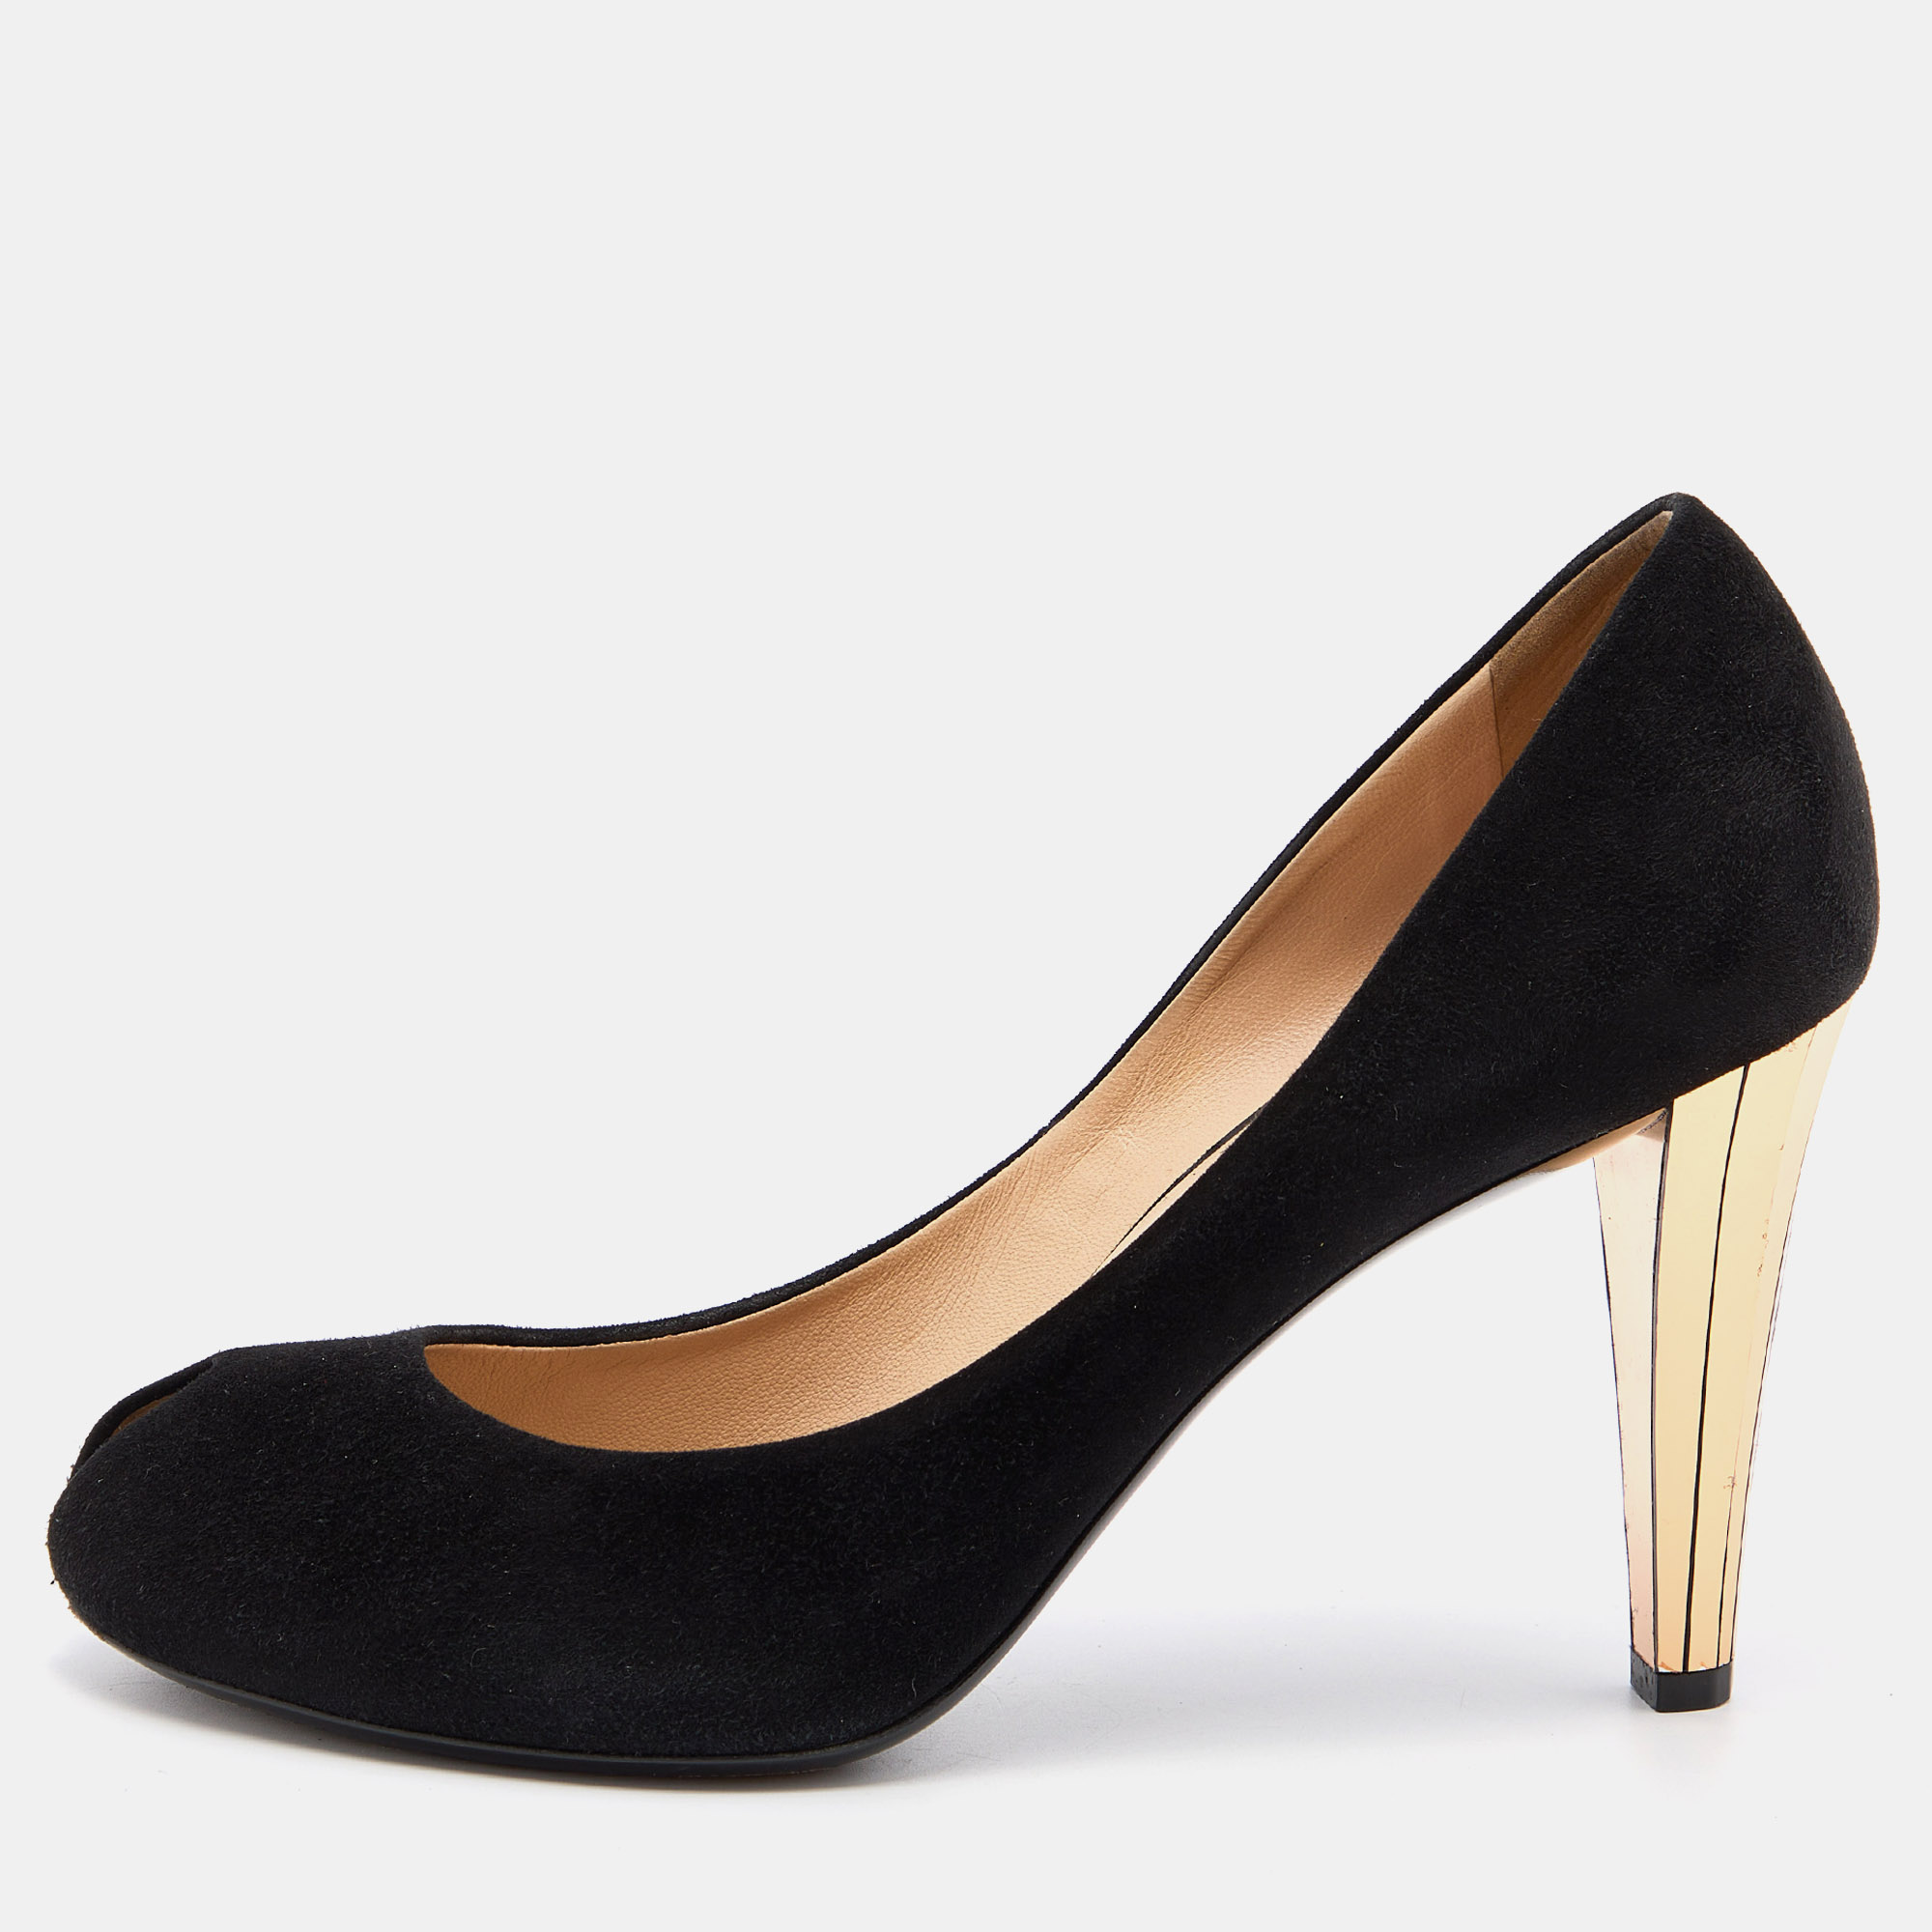 Pre-owned Gucci Black Suede Open Toe Pumps Size 40